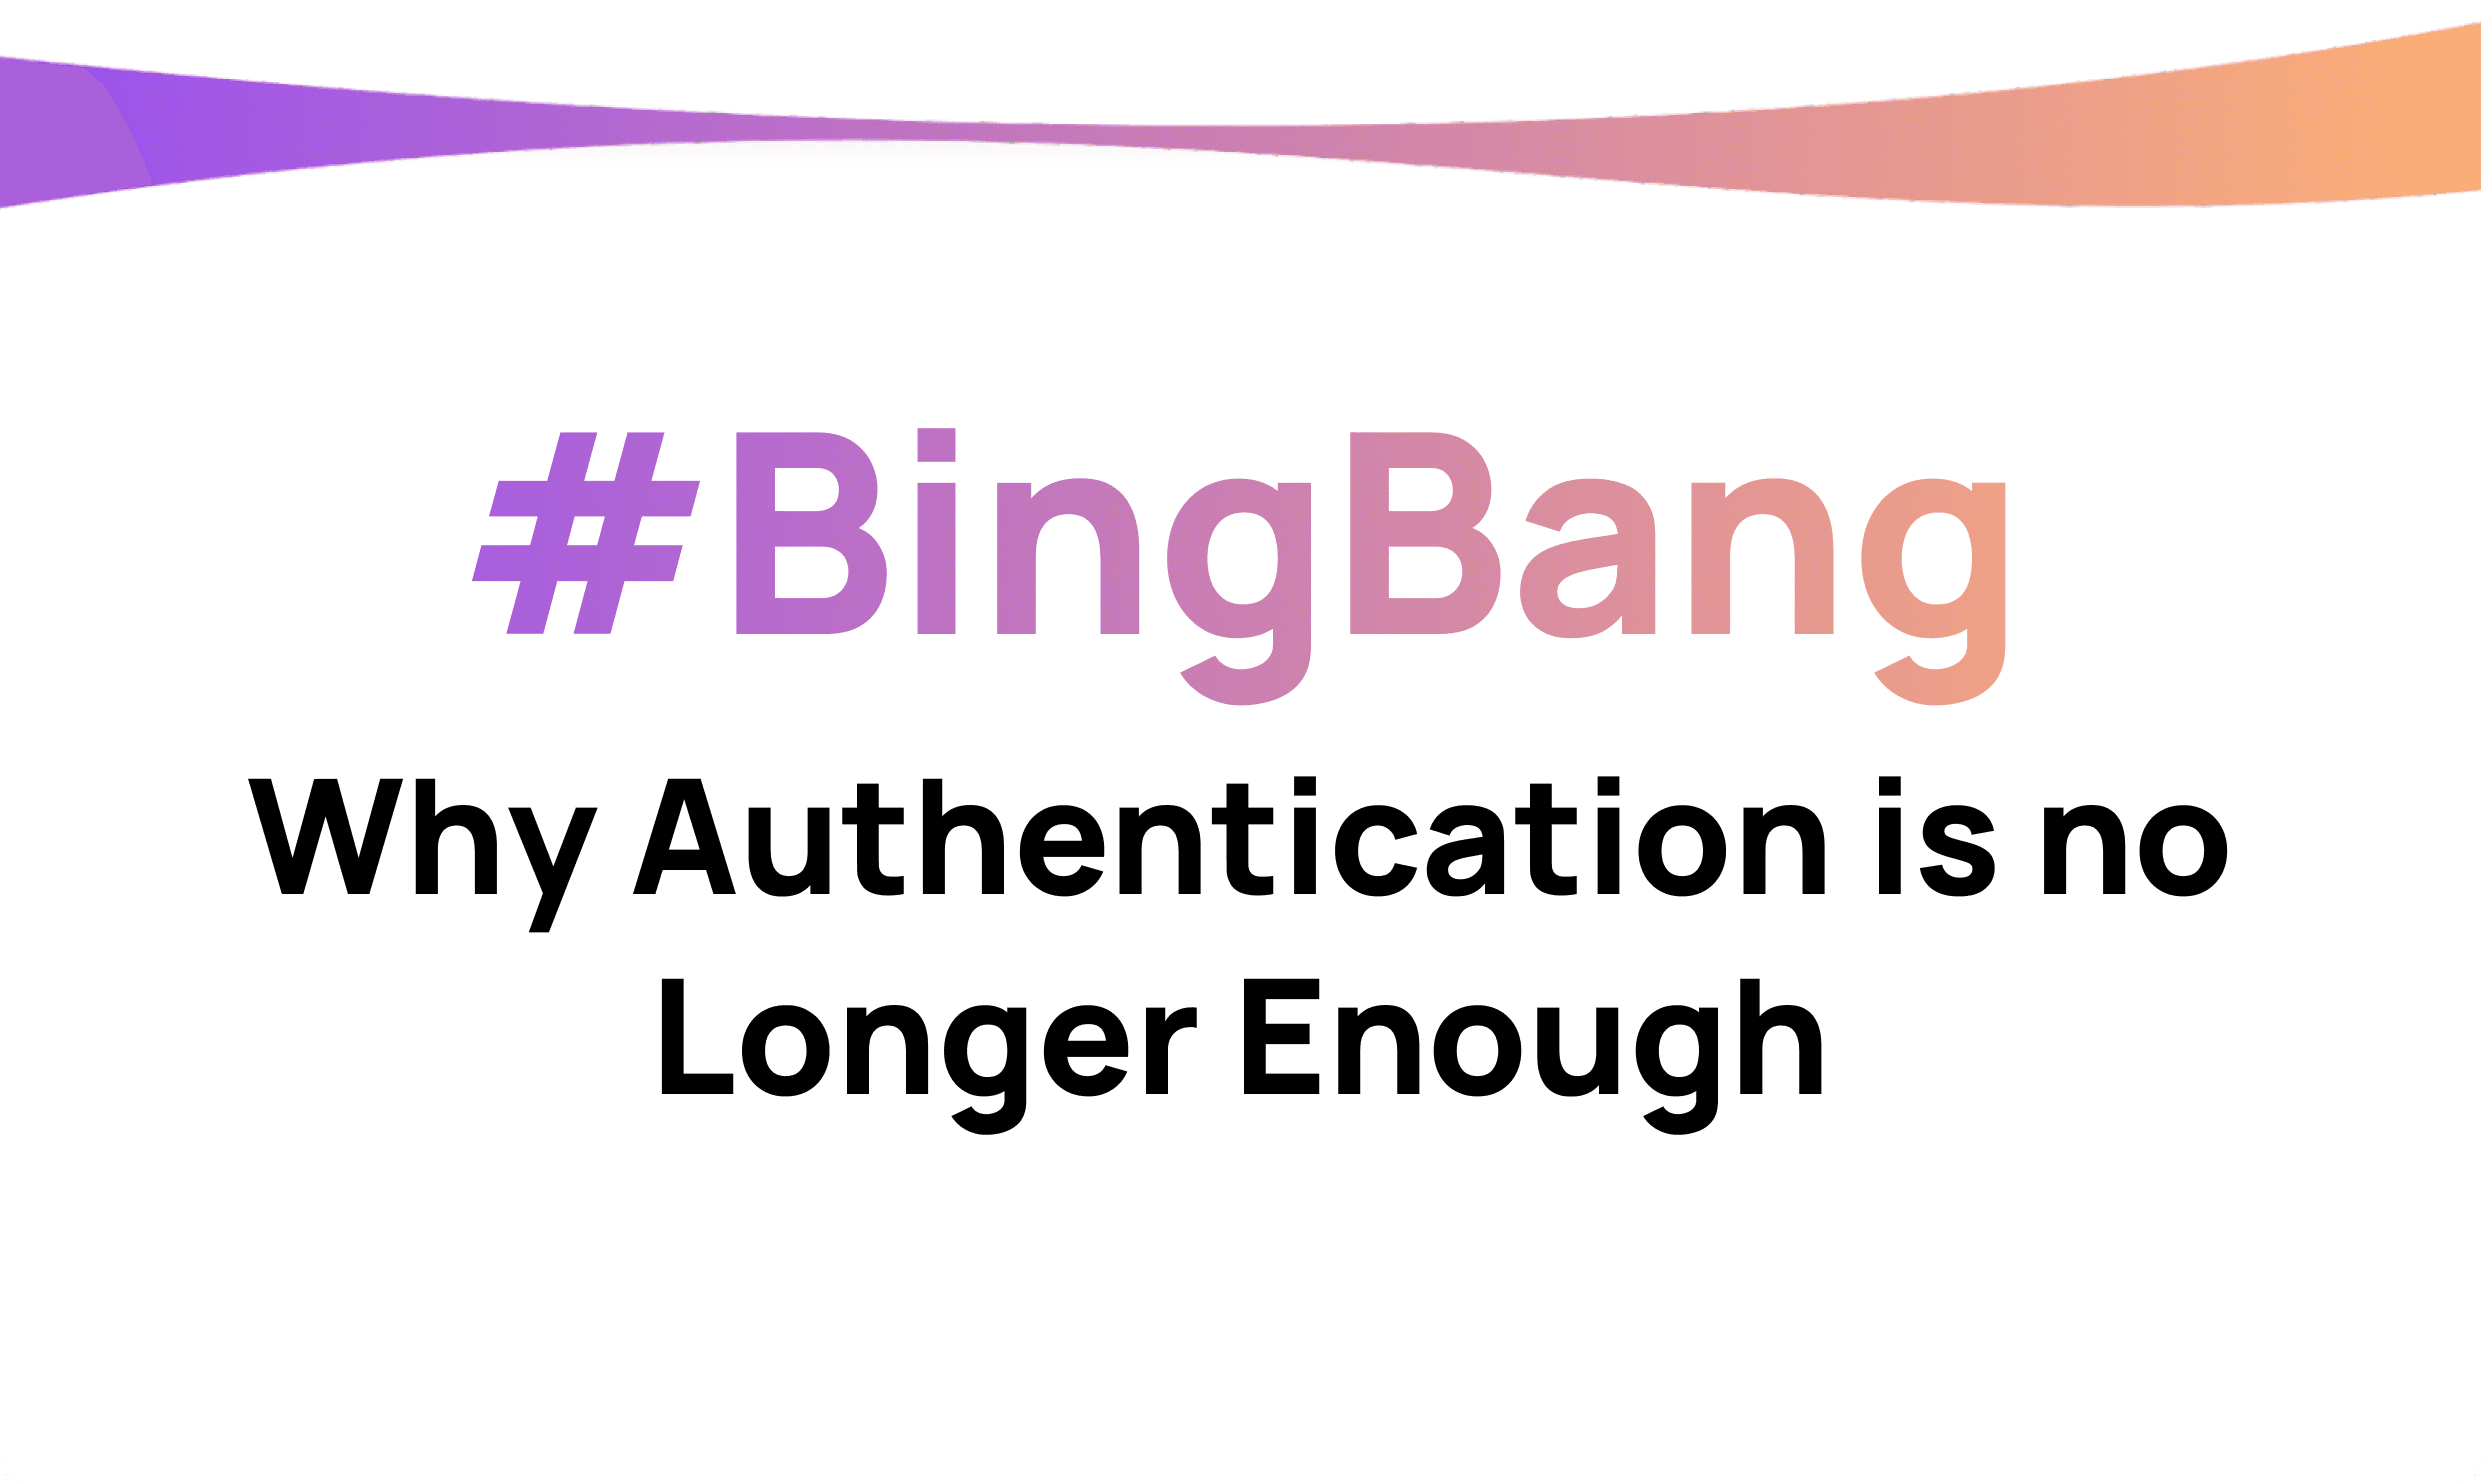 BingBang - Why Authentication is no Longer Enough